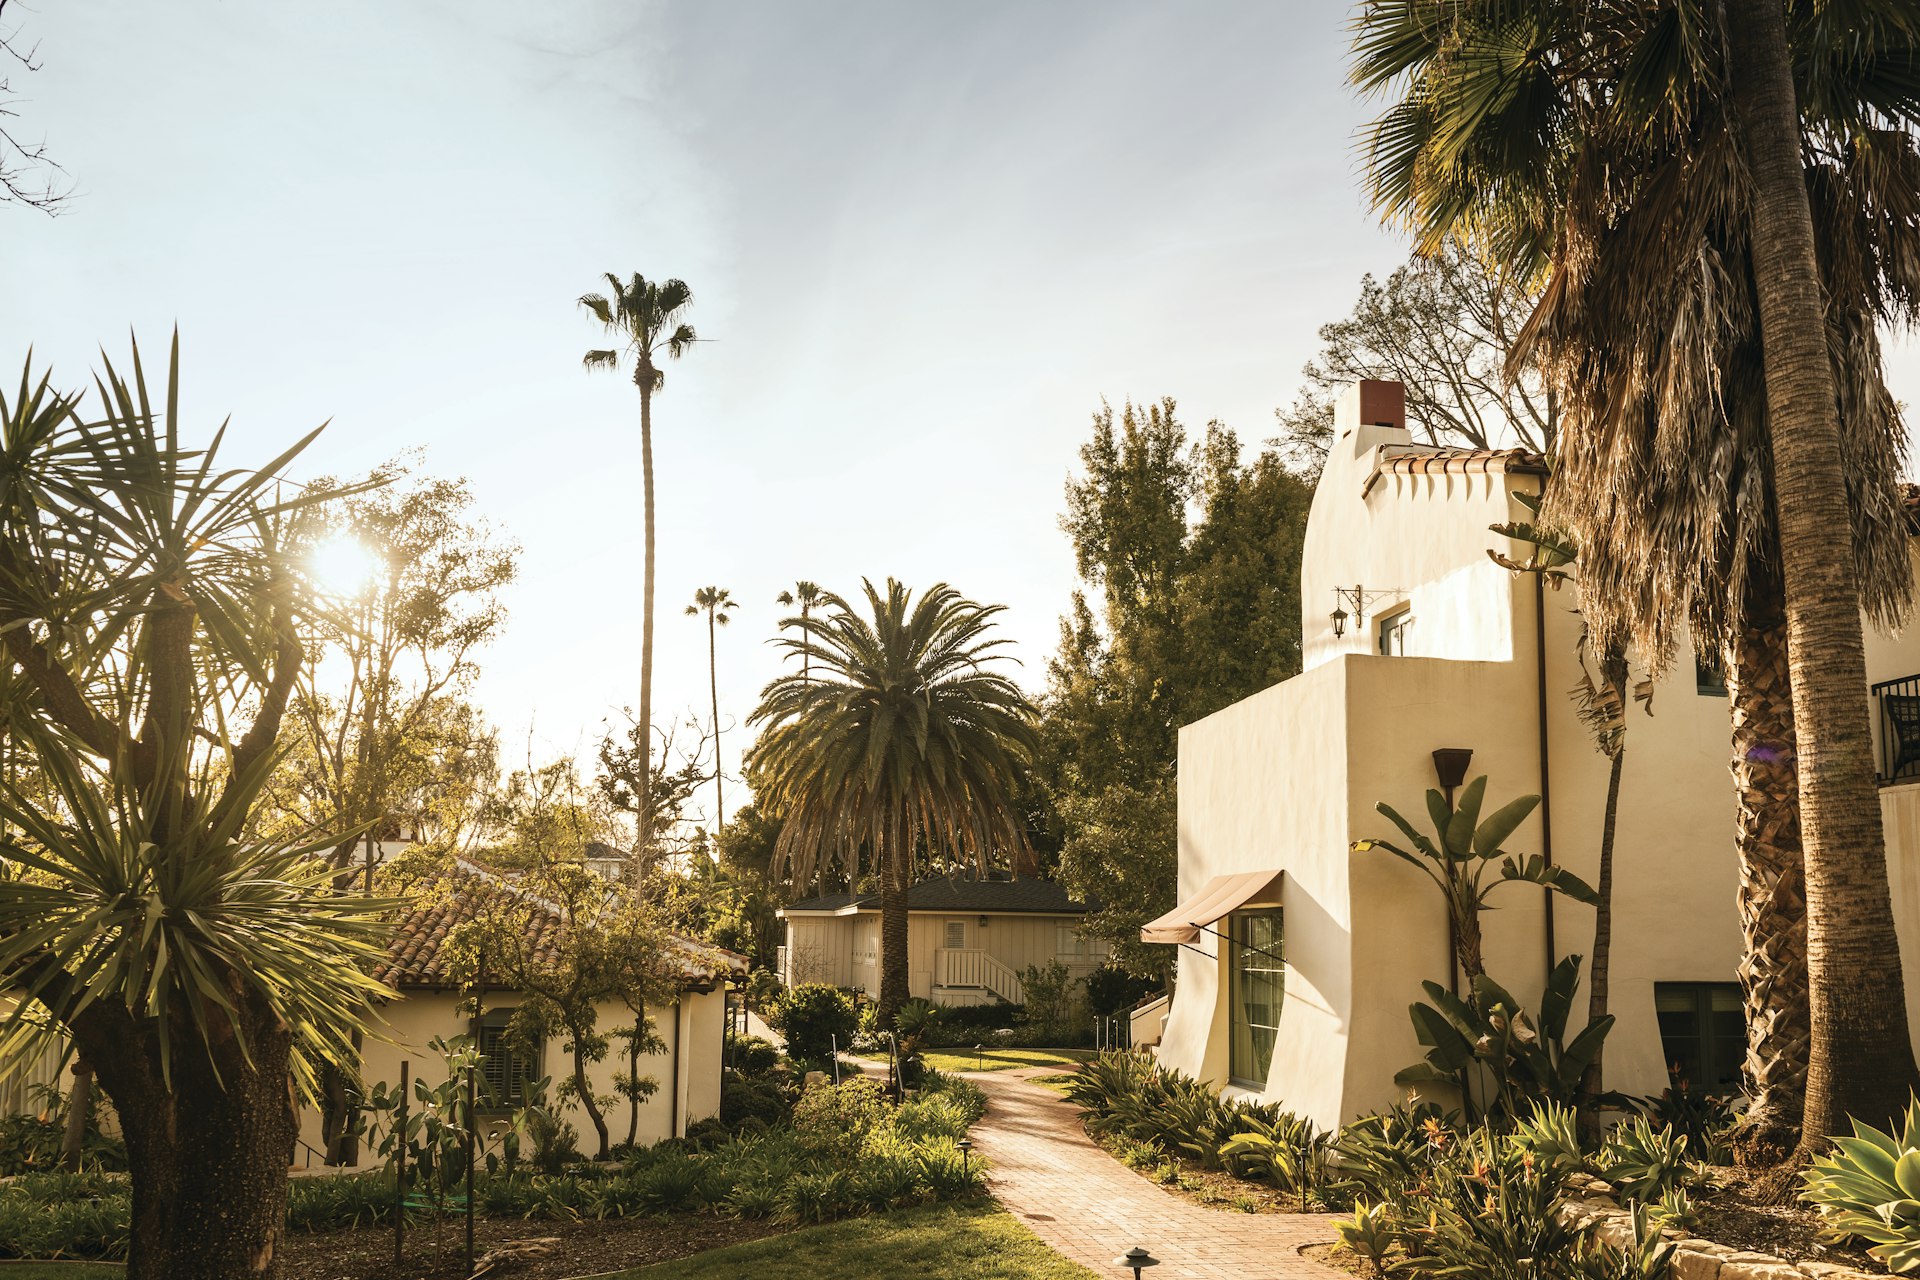 The Spanish Revival architecture of Belmond El Encanto, surrounded by palm trees